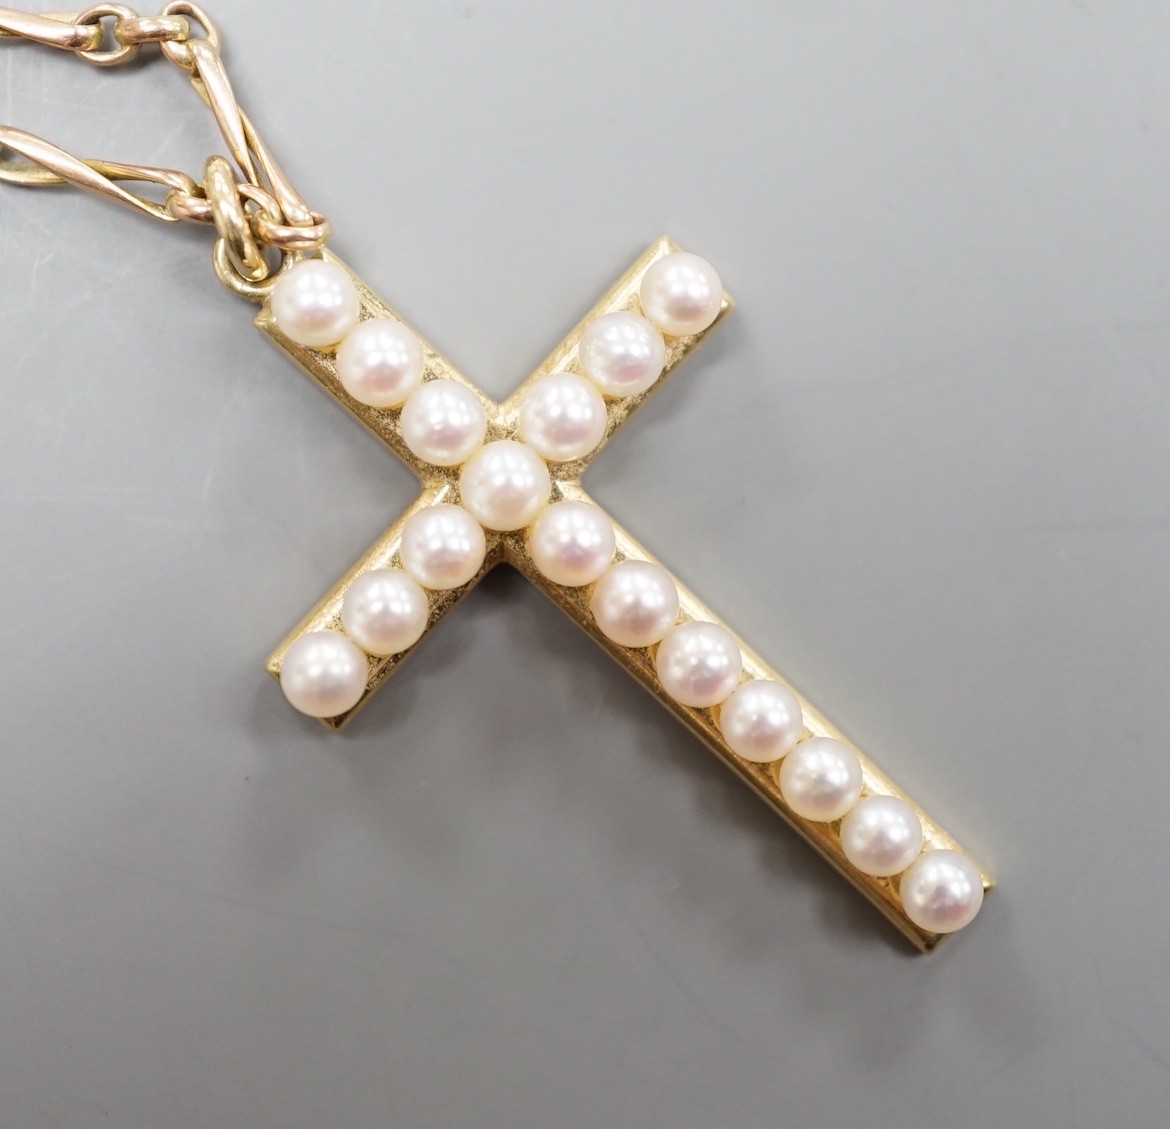 A Mikimoto 14k yellow metal and cultured pearl cluster set cross pendant, 35mm, on an associated yellow metal chain, gross weight 8.7 grams.